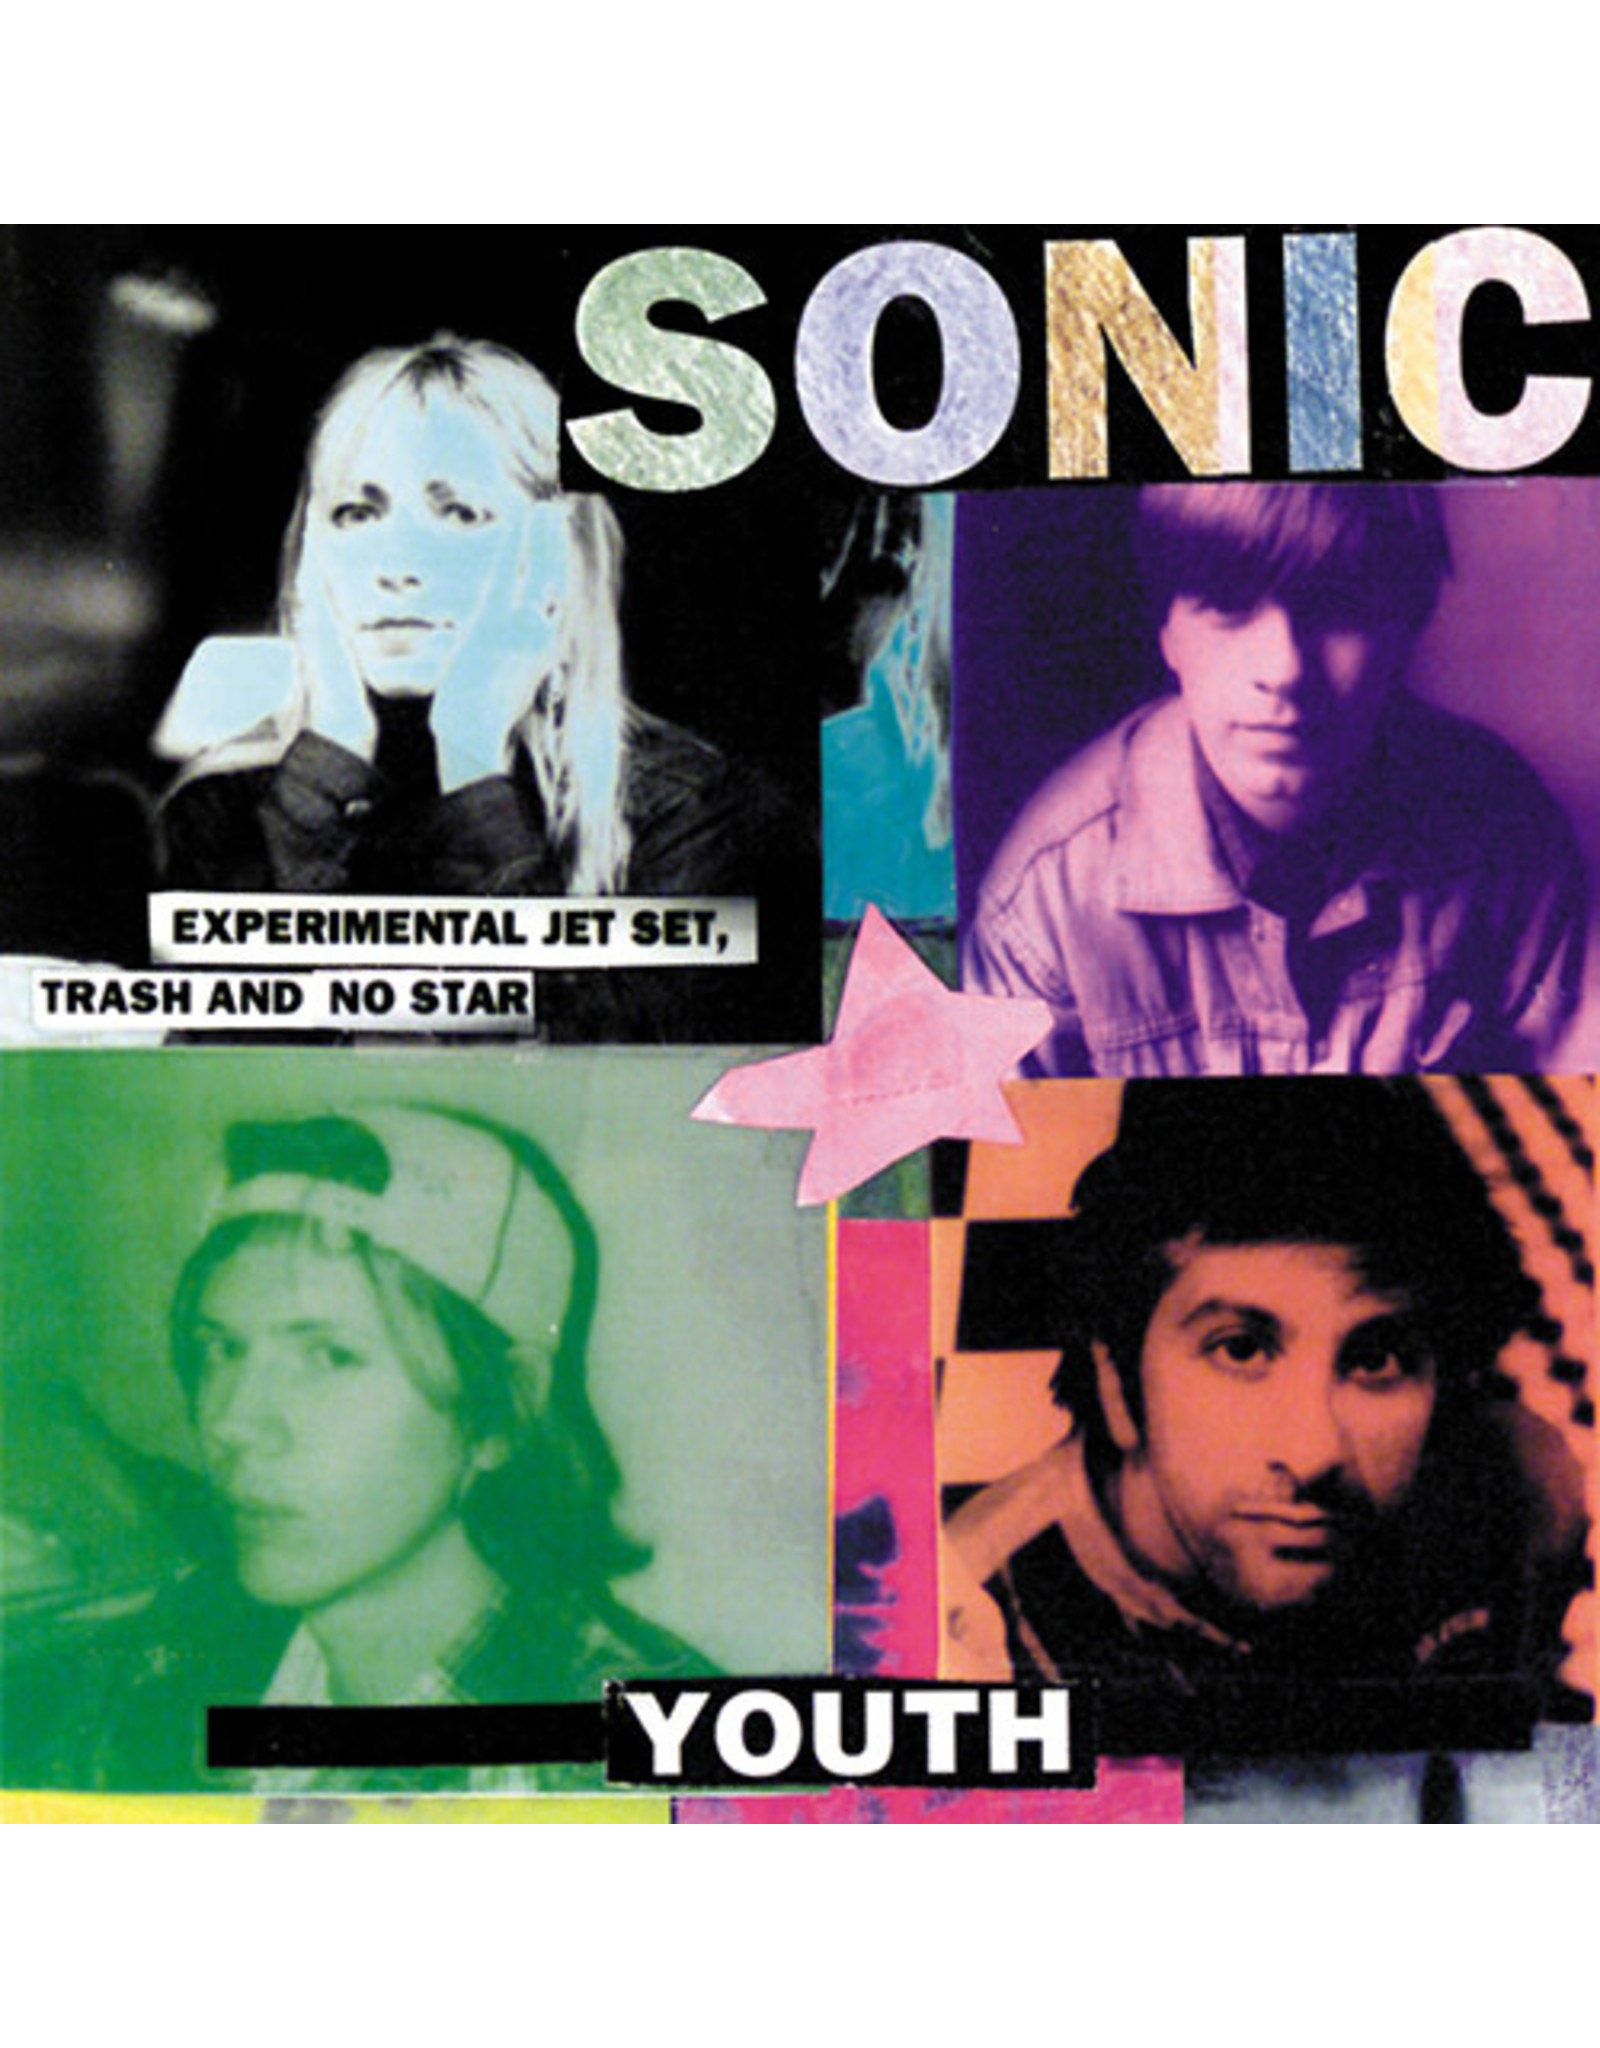 Geffen Sonic Youth: Experimental Jet Set, Trash and No Star LP